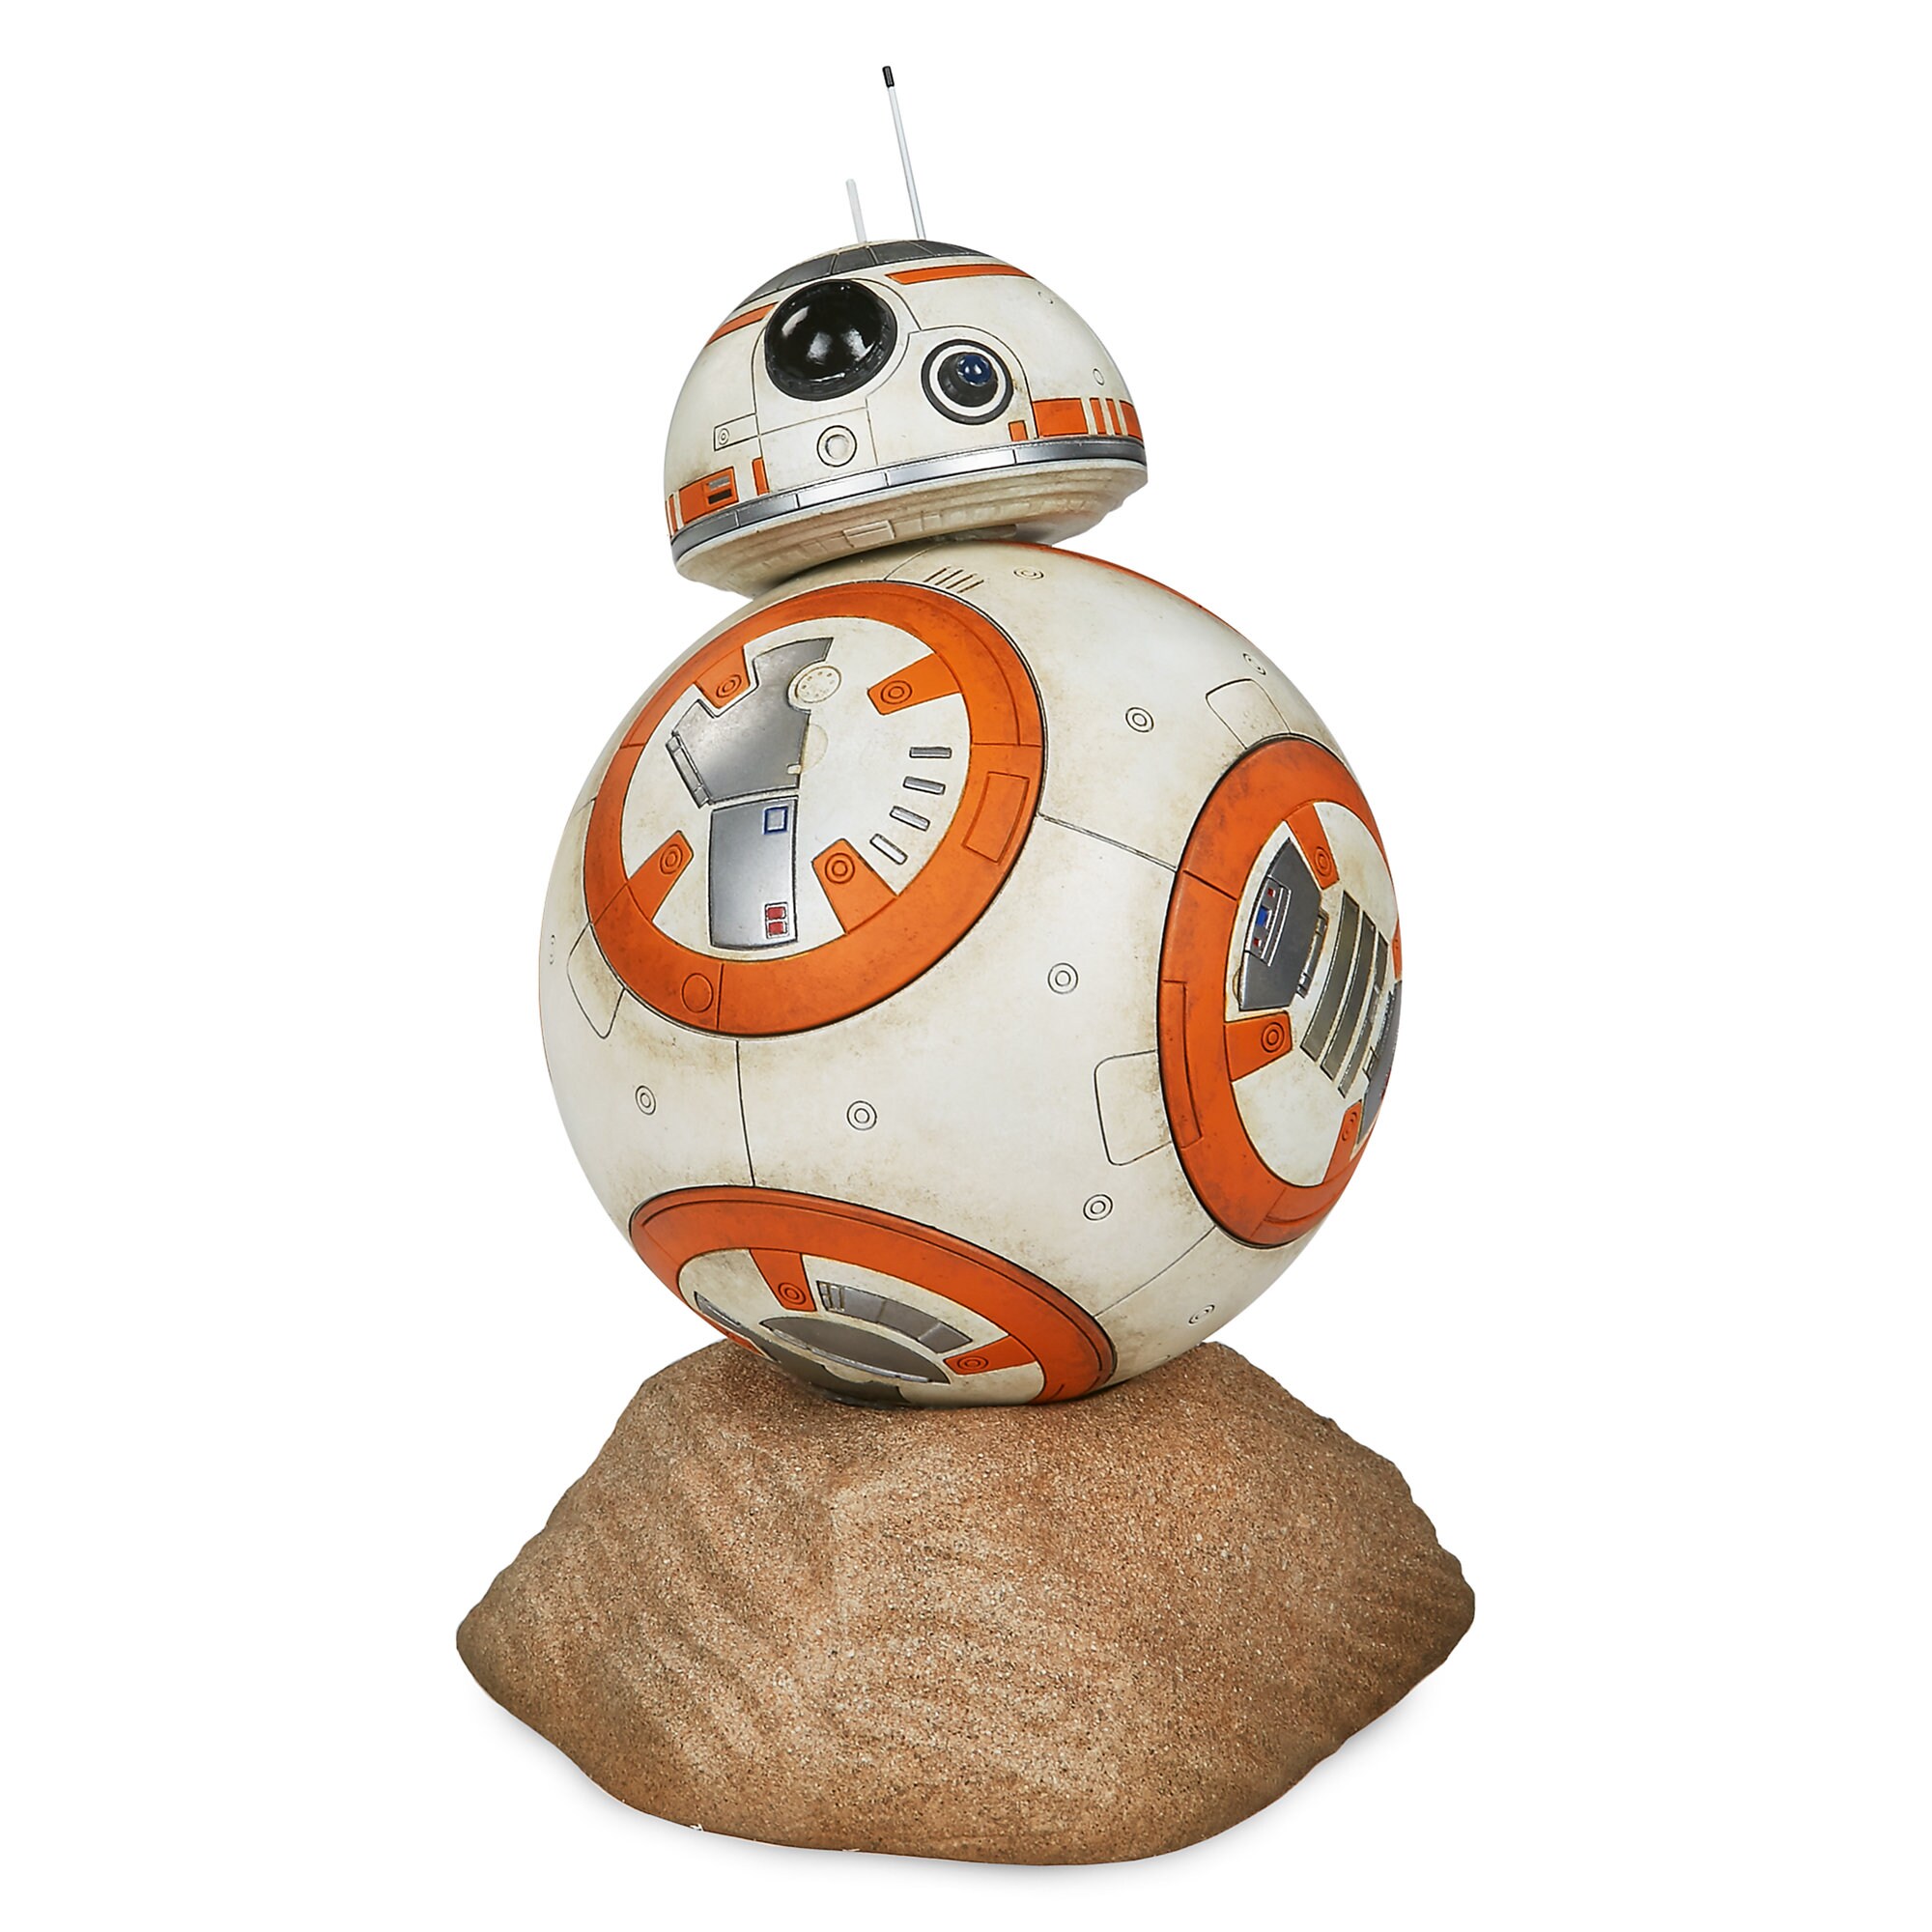 BB-8 Premium Format Figure by Sideshow Collectibles - Limited Edition